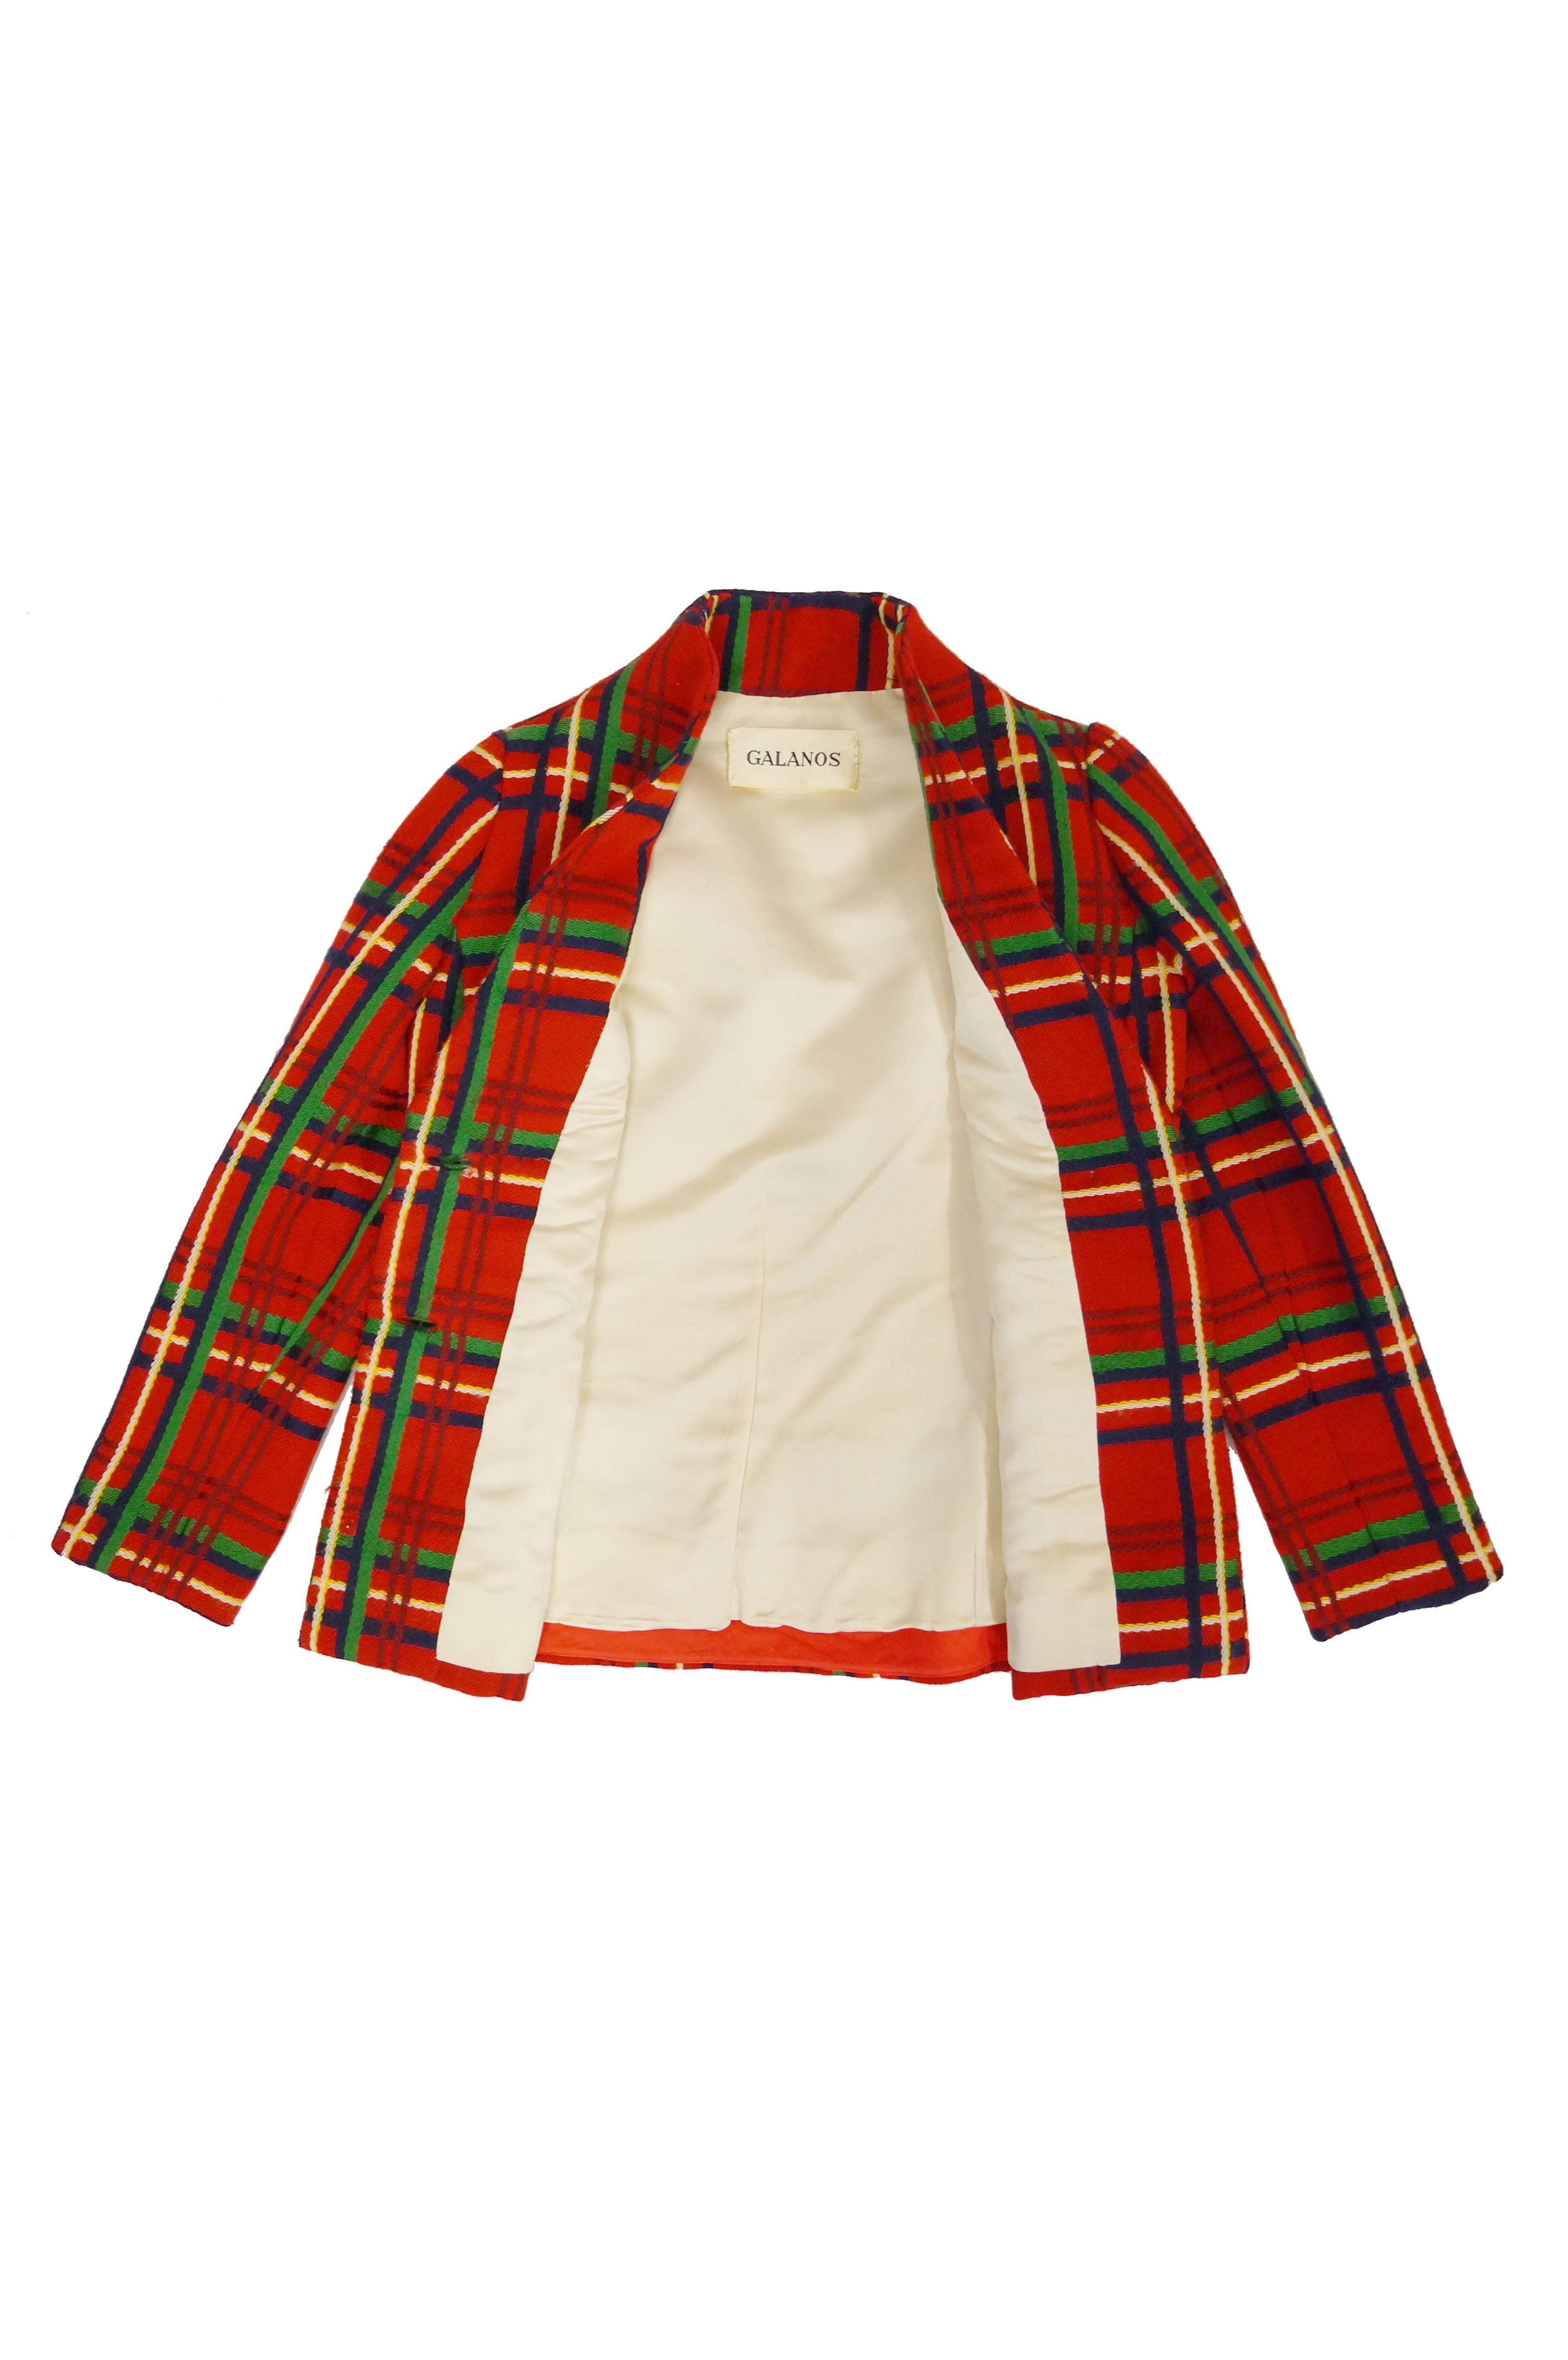 1970s Galanos Red Plaid Dress and Jacket For Sale 3